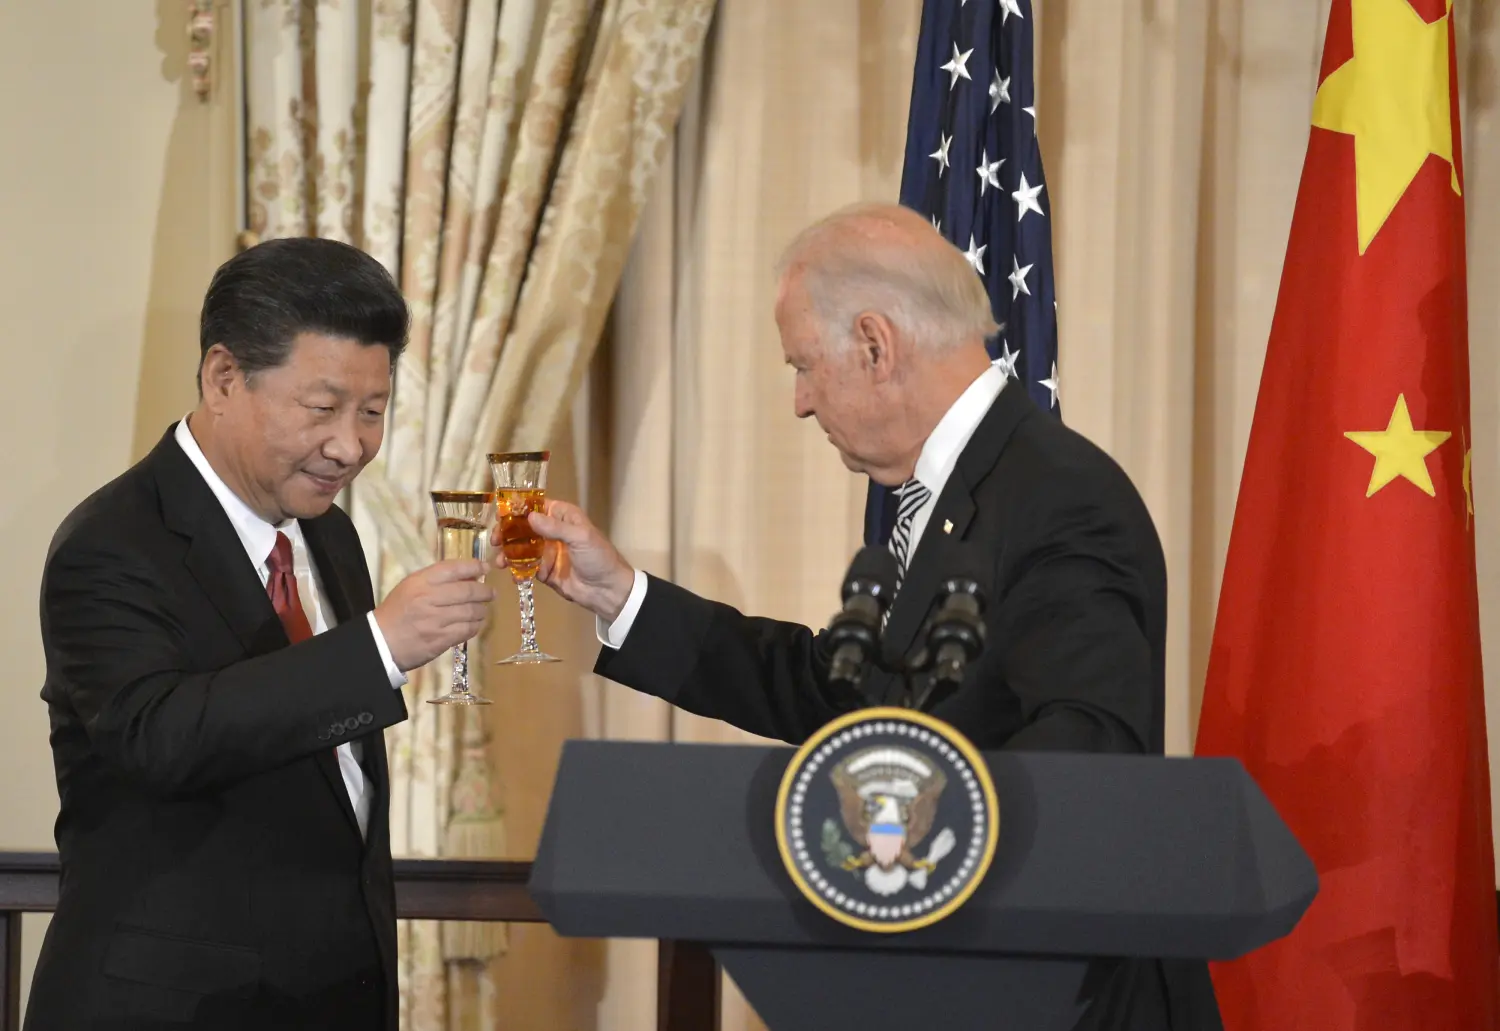 Chinese President Xi Jinping (L) and Vice President Joe Biden raise their glasses in a toast during a luncheon at the State Department, in Washington, September 25, 2015. Xi's visit with President Barack Obama is expected to be clouded by differences over alleged Chinese cyber spying, Beijing's economic policies and territorial disputes in the South China Sea.            REUTERS/Mike Theiler